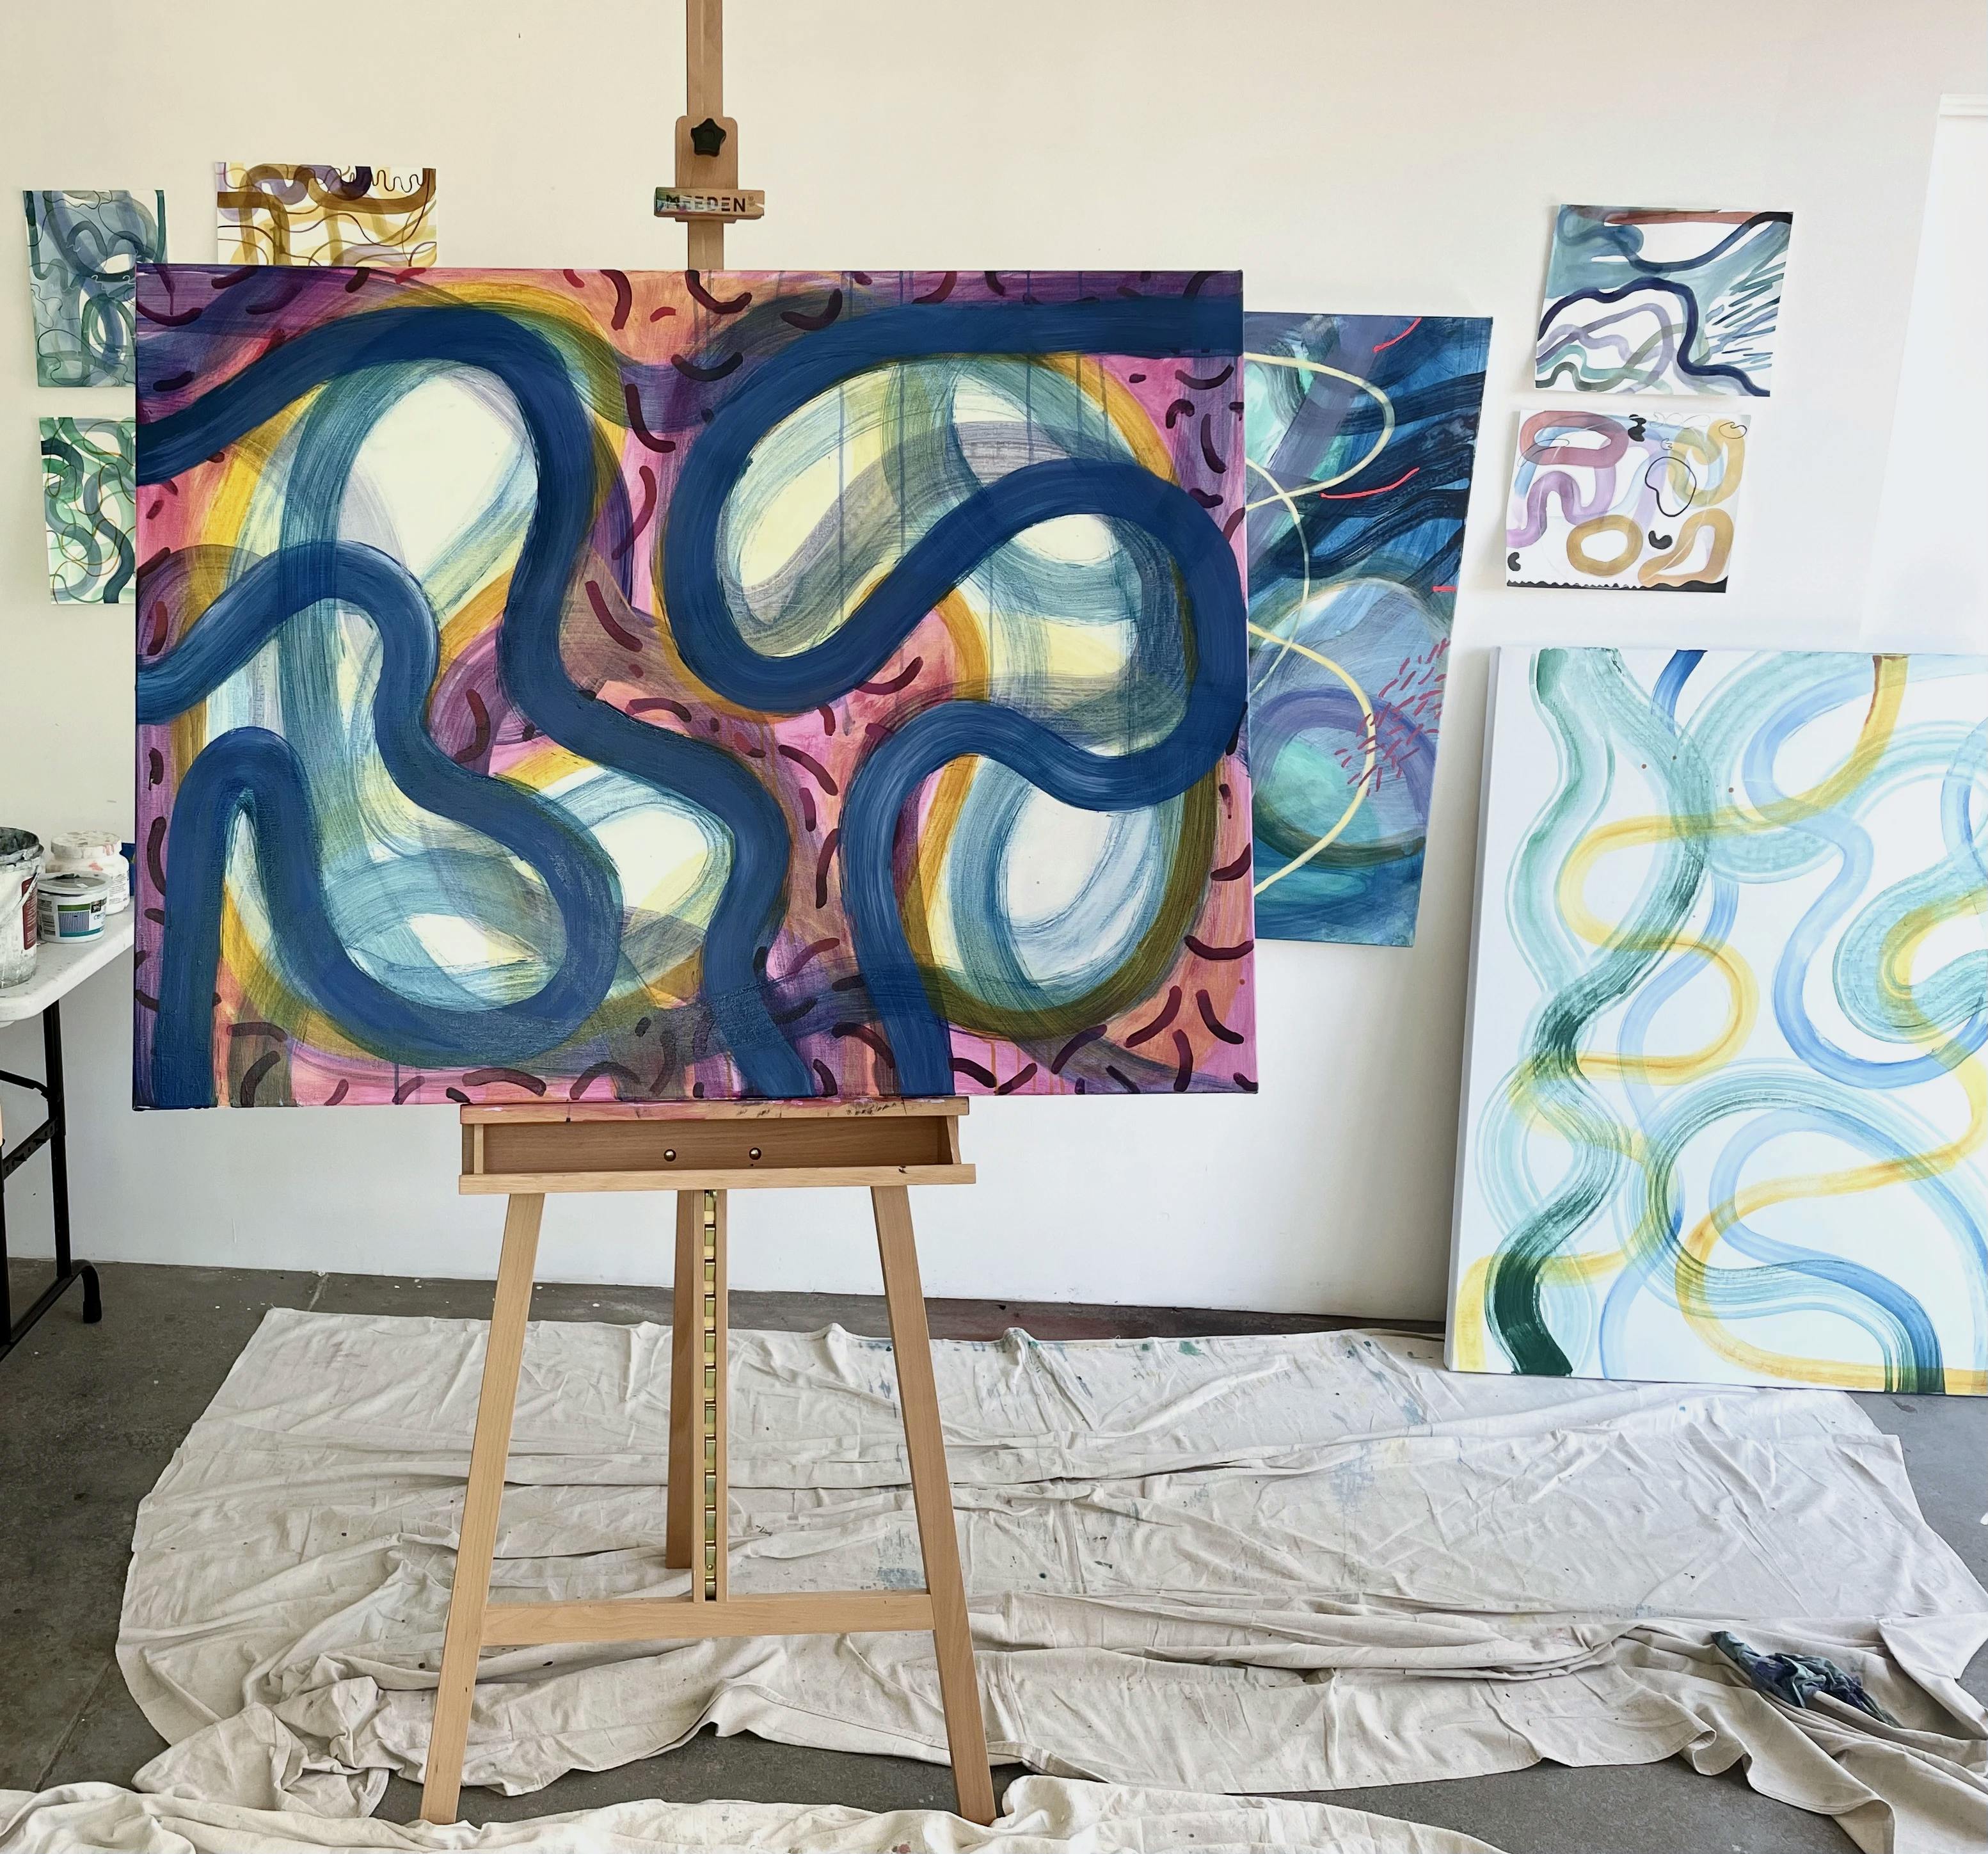 Abstract, gestural paintings of water landscapes, one on an easel and others mounted on a white wall, inside artist Aliza Cohen's studio.